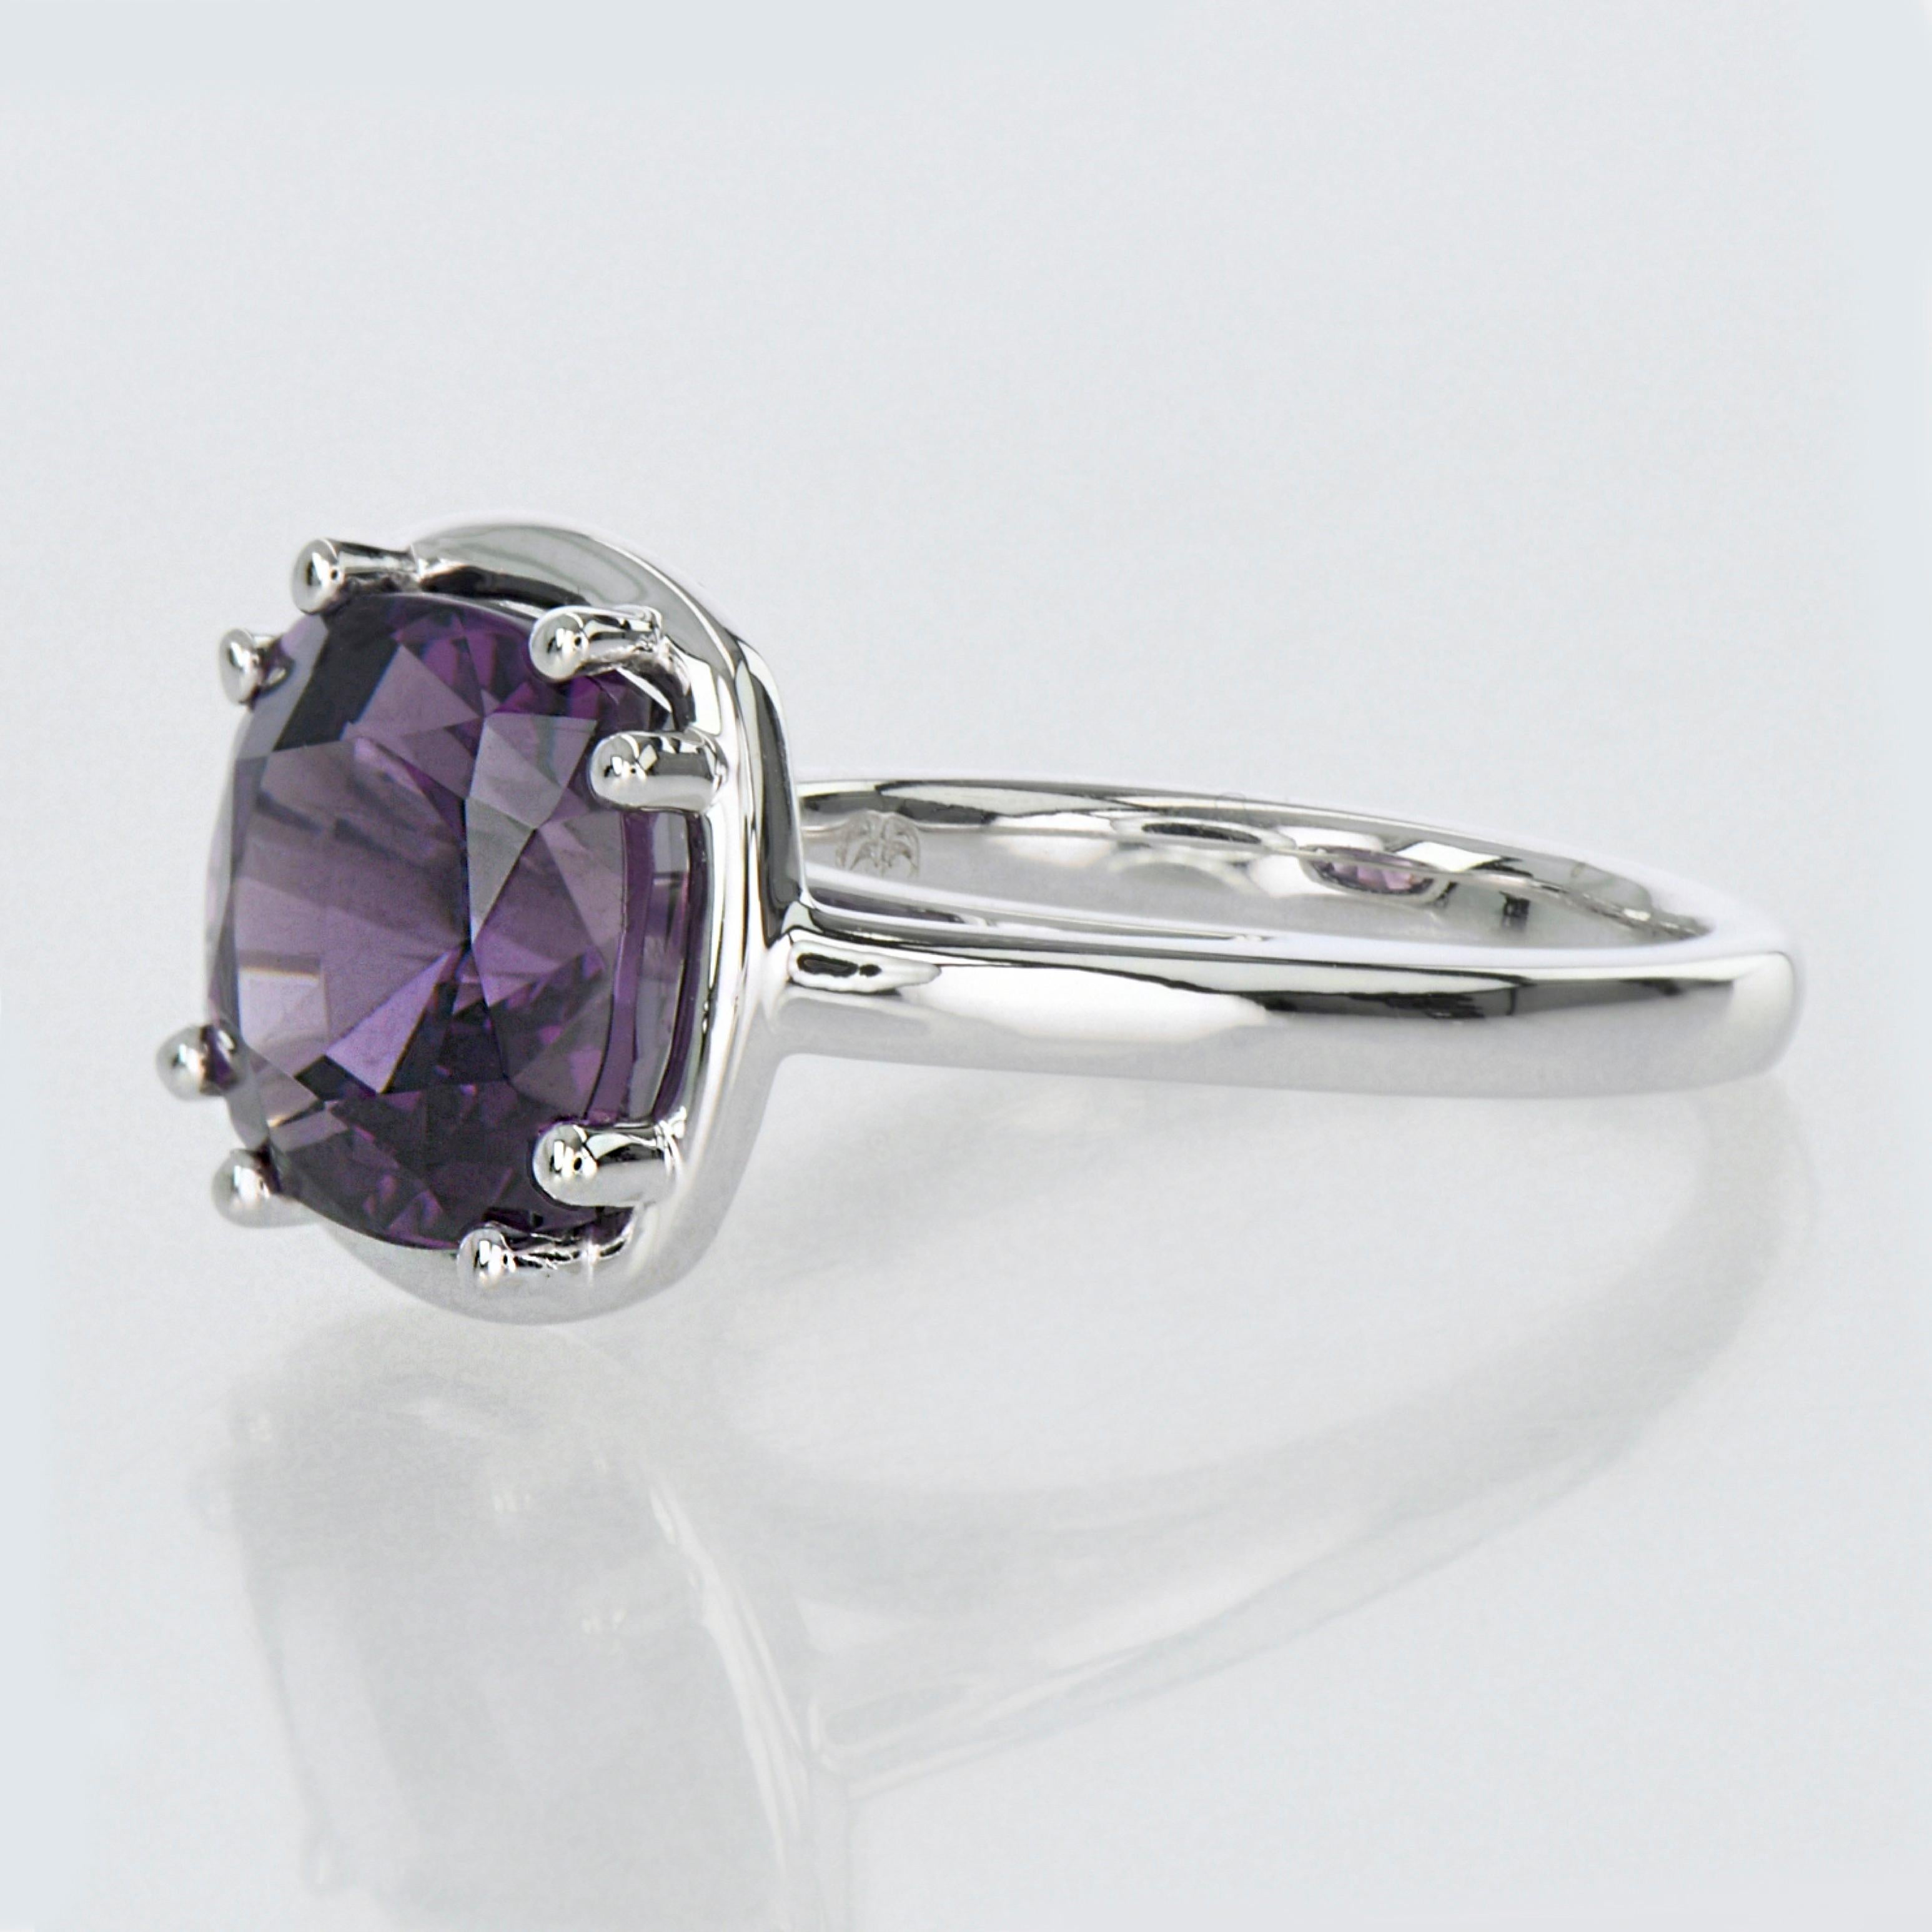 Modern 4.89ct Purple Spinel Ring-Cushion Cut-18KT White Gold-GIA Certified-Rare-Unique For Sale